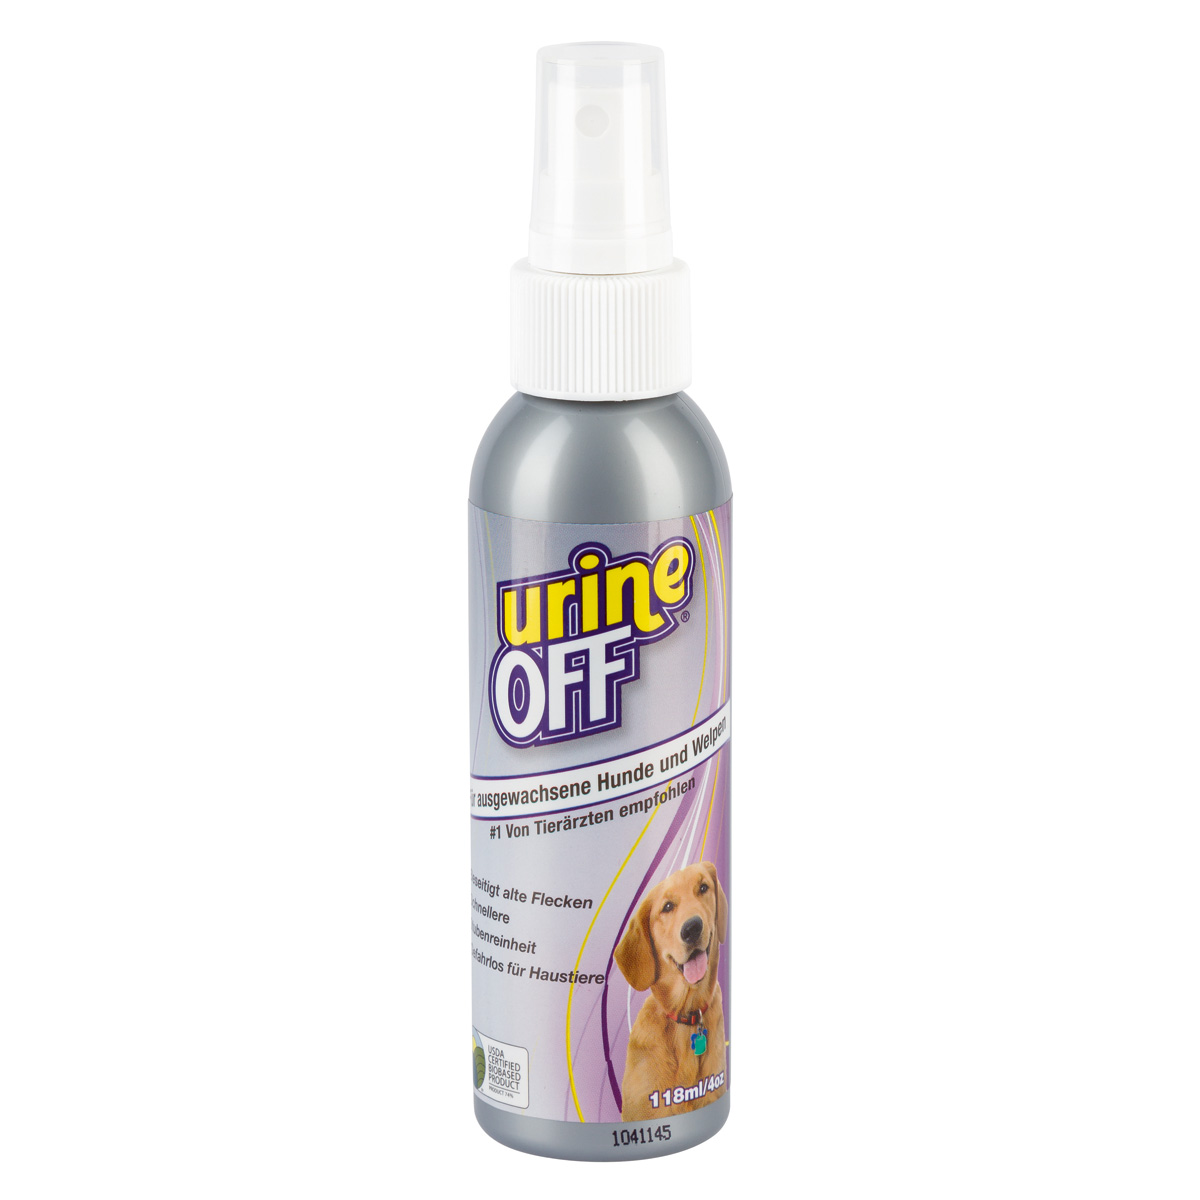 UrineOff Spray dog 118 ml odour and stain remover